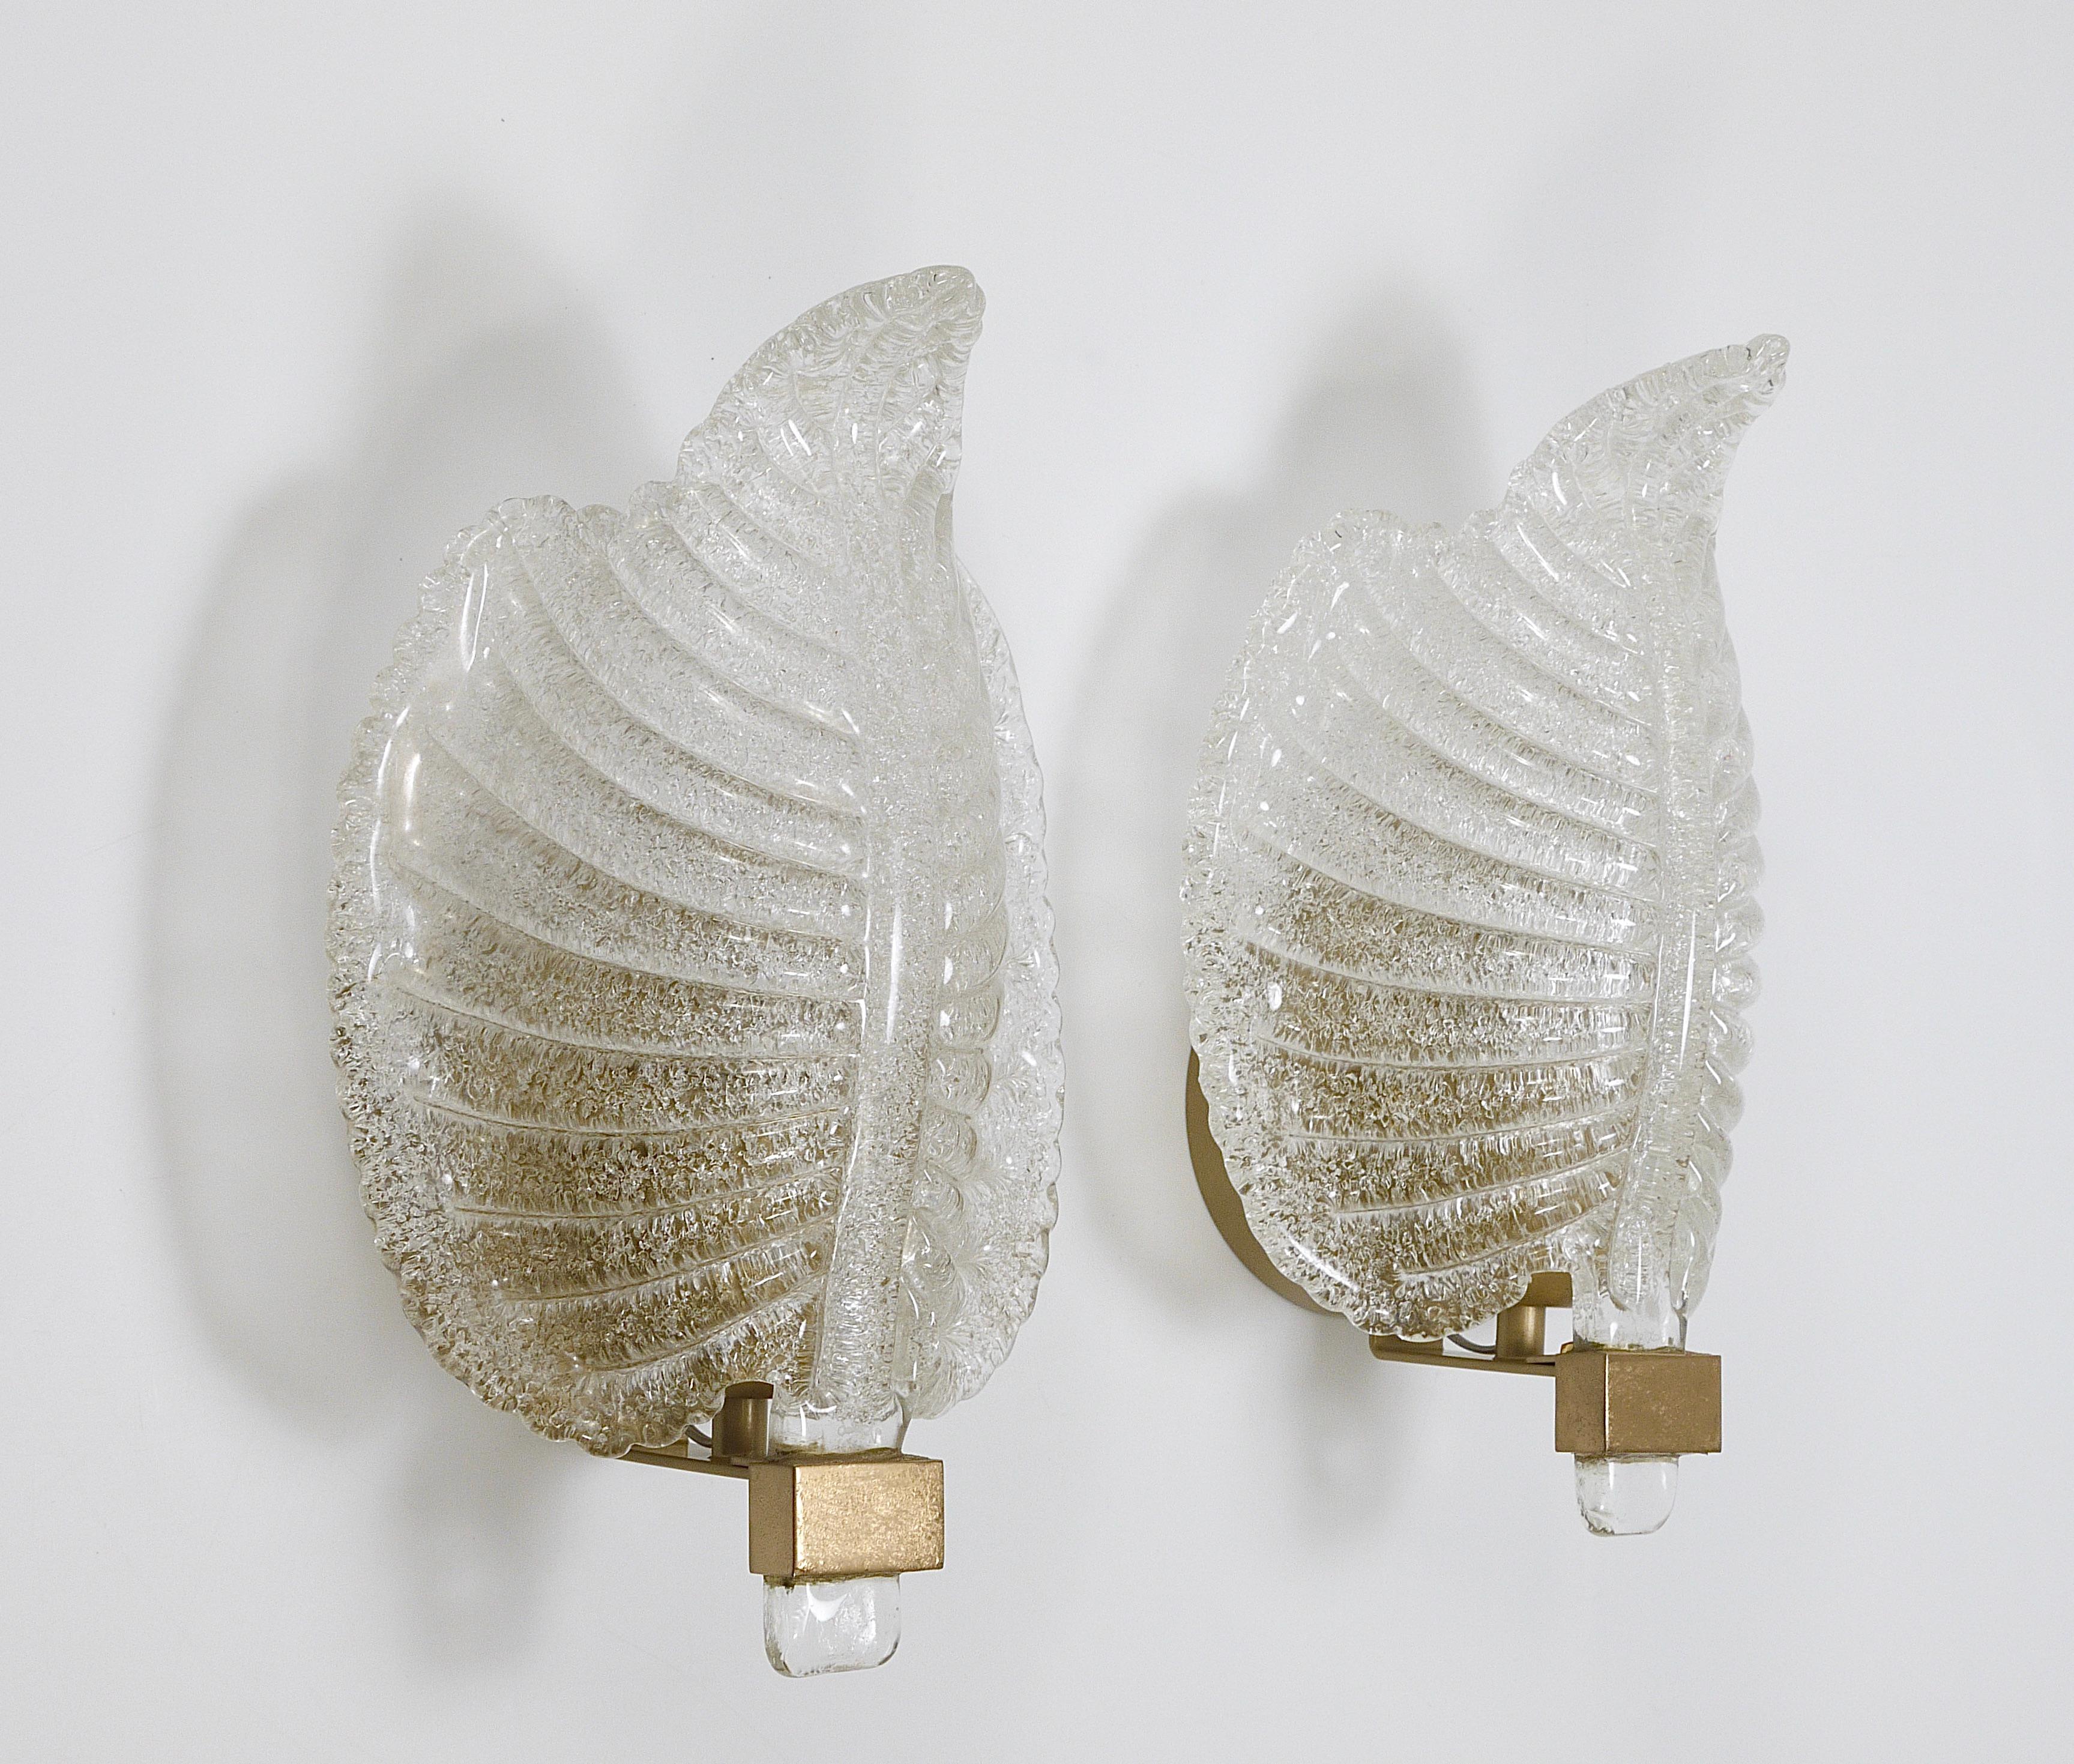 20th Century Barovier and Toso Style Venetian Murano Glass Leaf Sconces / Wall Lamps, Italy For Sale